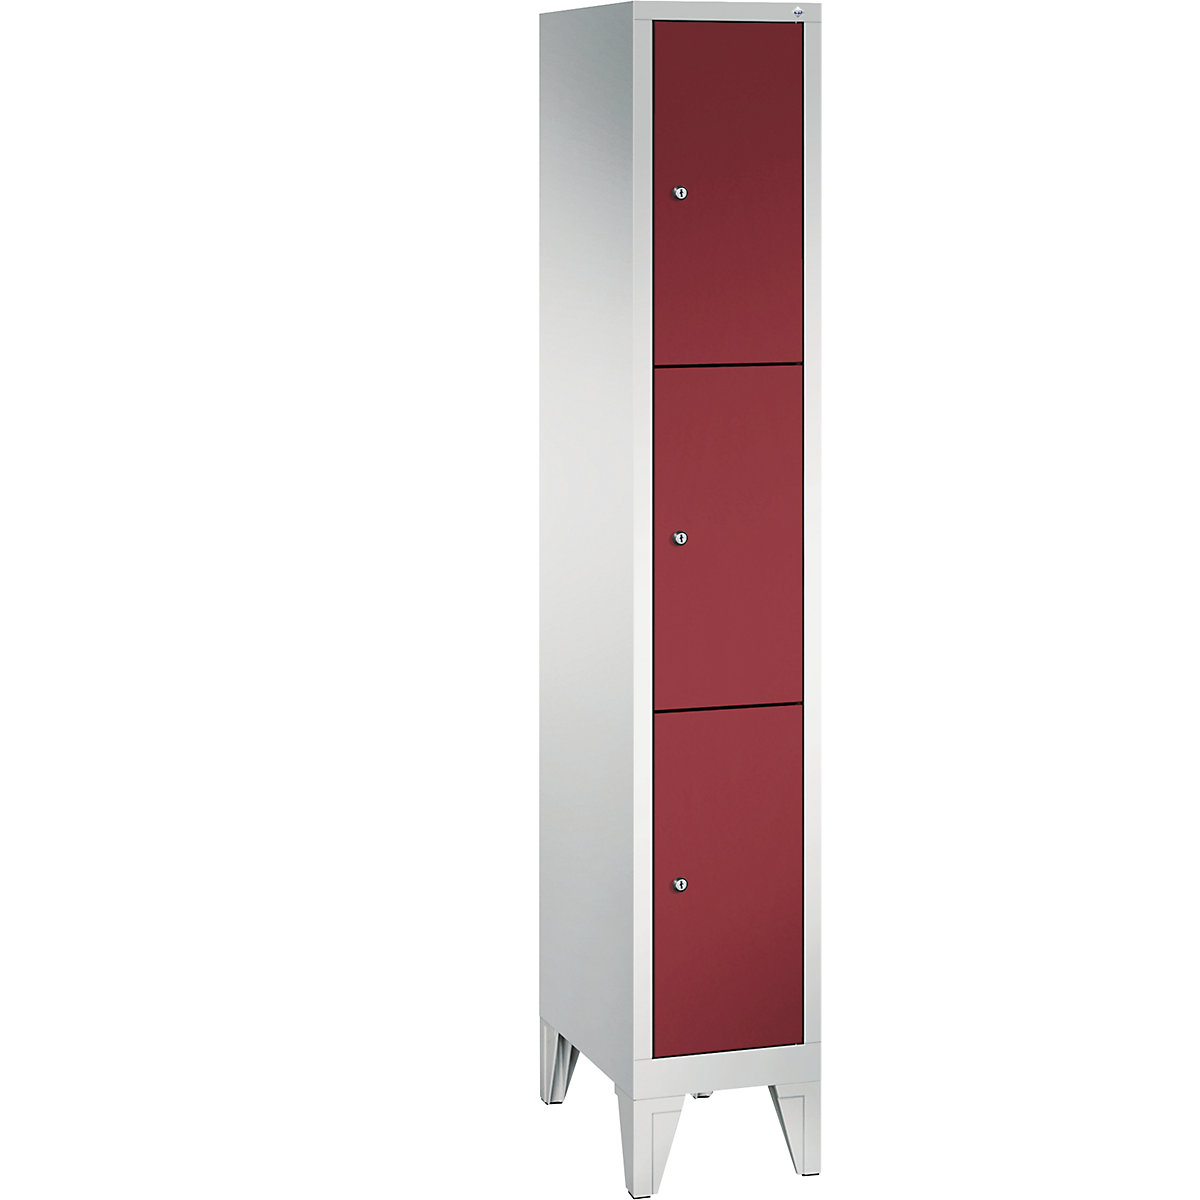 CLASSIC locker unit with feet – C+P, 1 compartment, 3 shelf compartments, compartment width 300 mm, light grey / ruby red-9